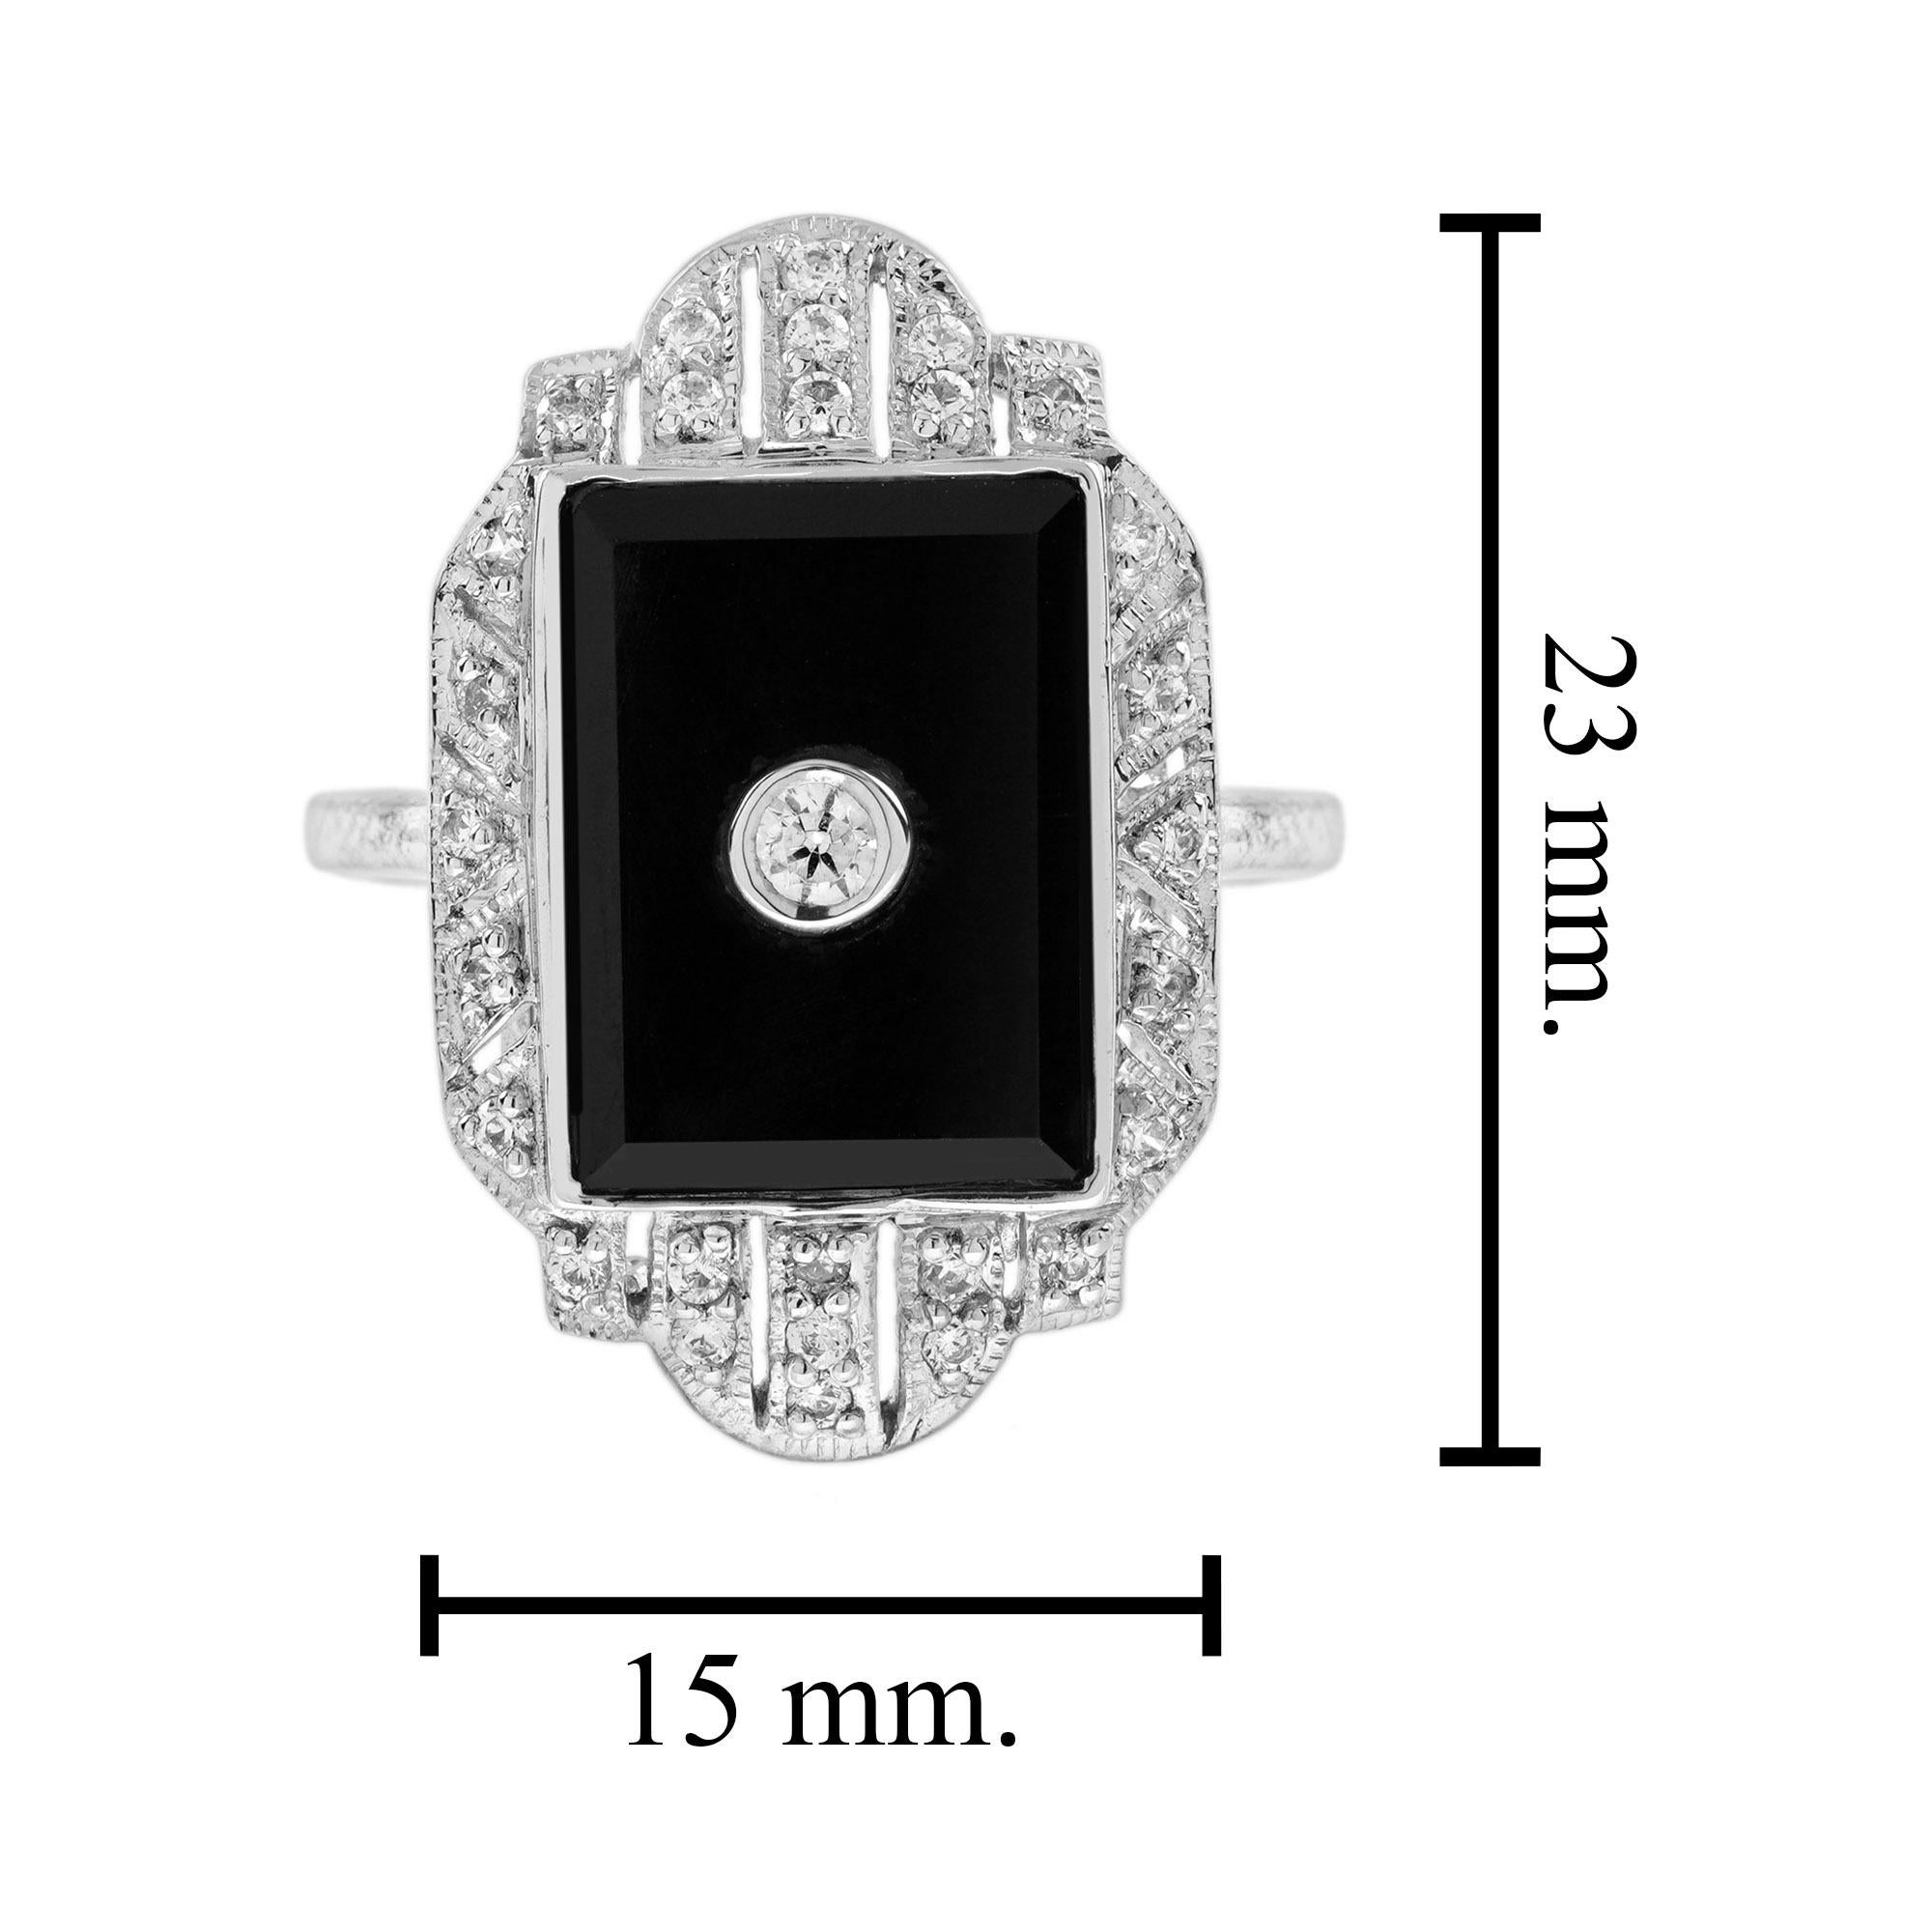 For Sale:  Diamond and Onyx Art Deco Style Dinner Ring in 14K White Gold 7